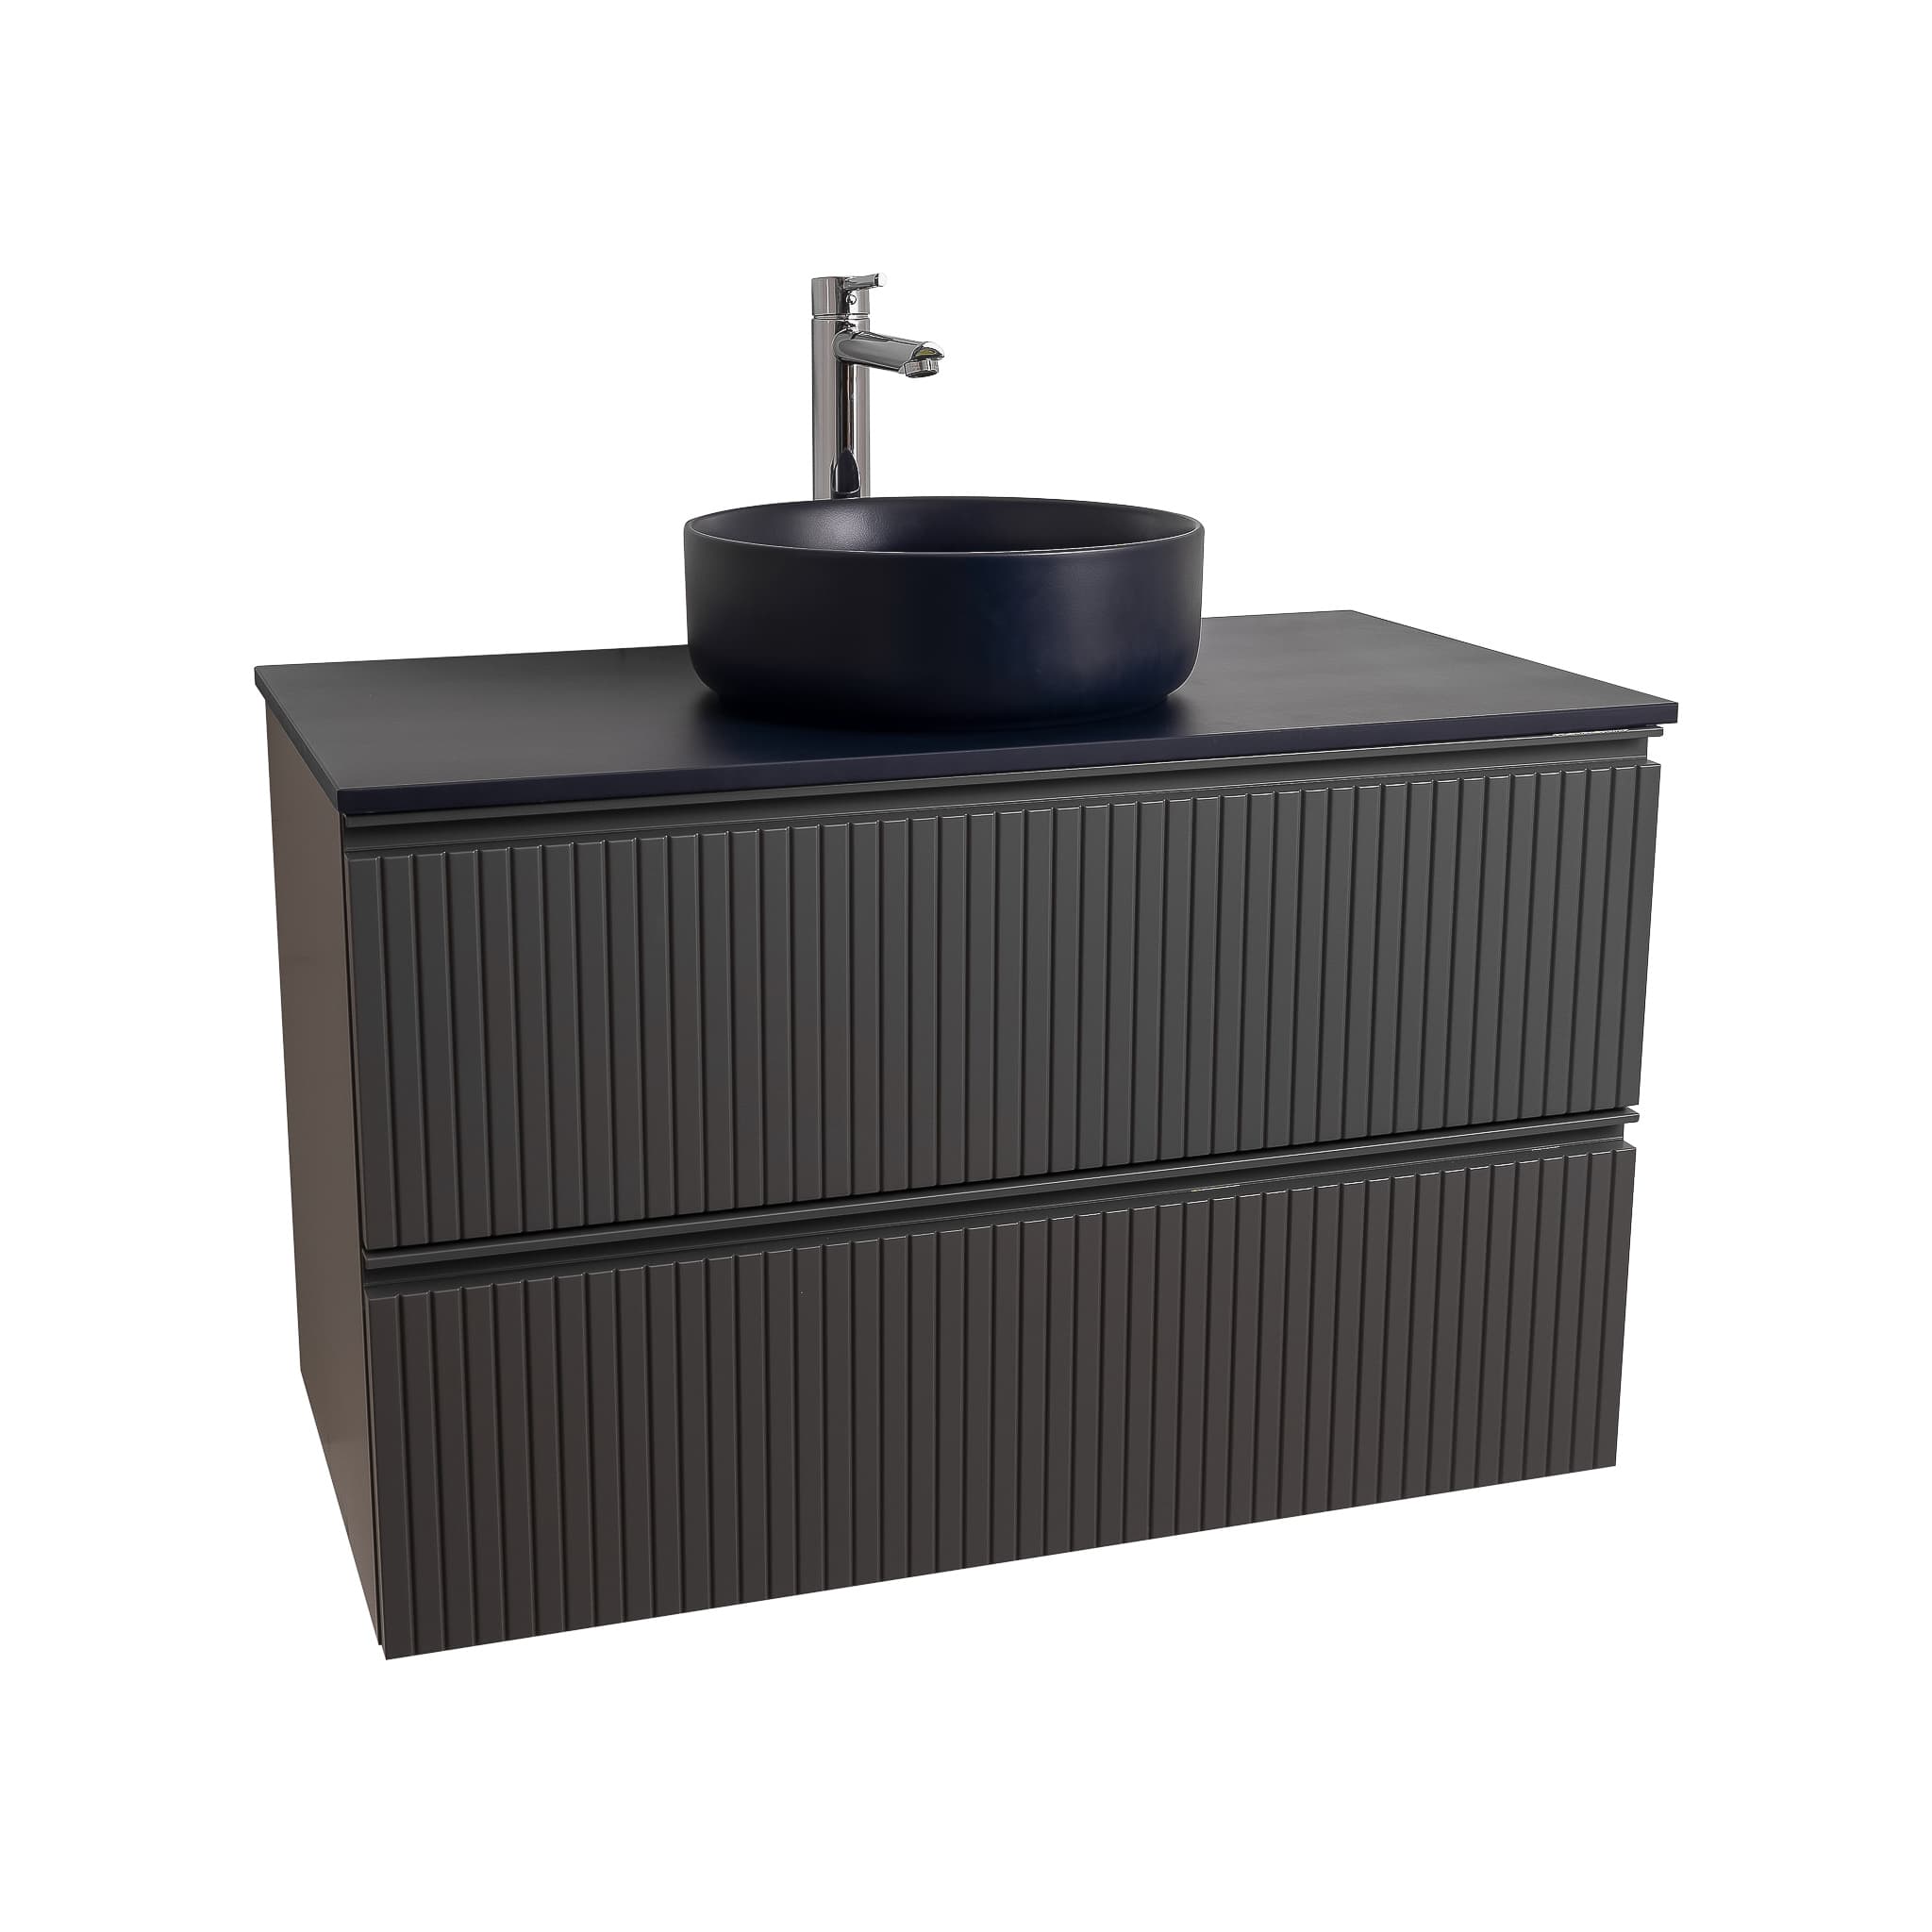 Ares 39.5 Matte Grey Cabinet, Ares Navy Blue Top And Ares Navy Blue Ceramic Basin, Wall Mounted Modern Vanity Set